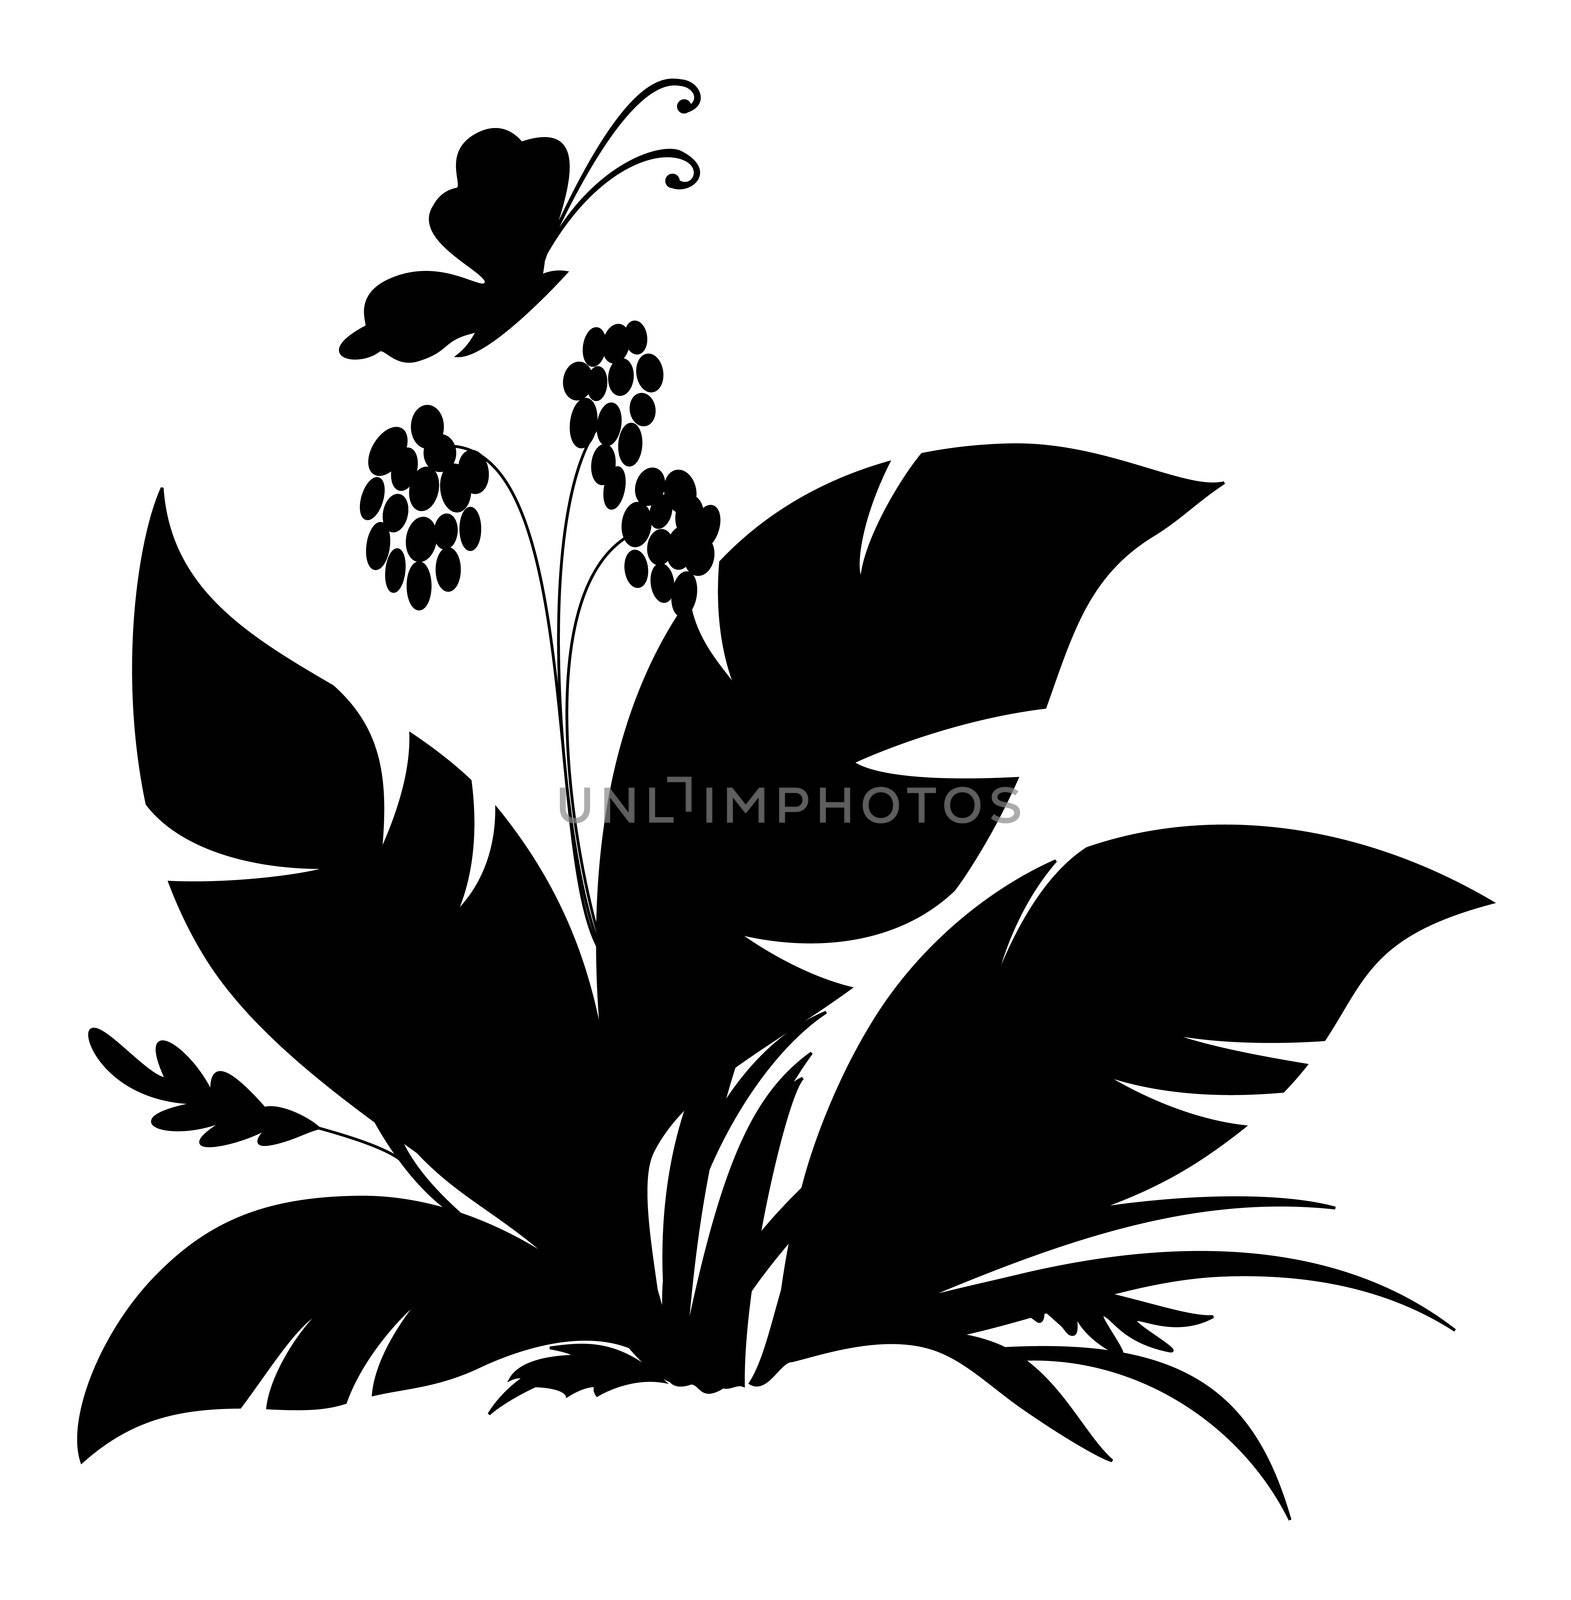 Tropical plant and butterfly, black silhouette on white background